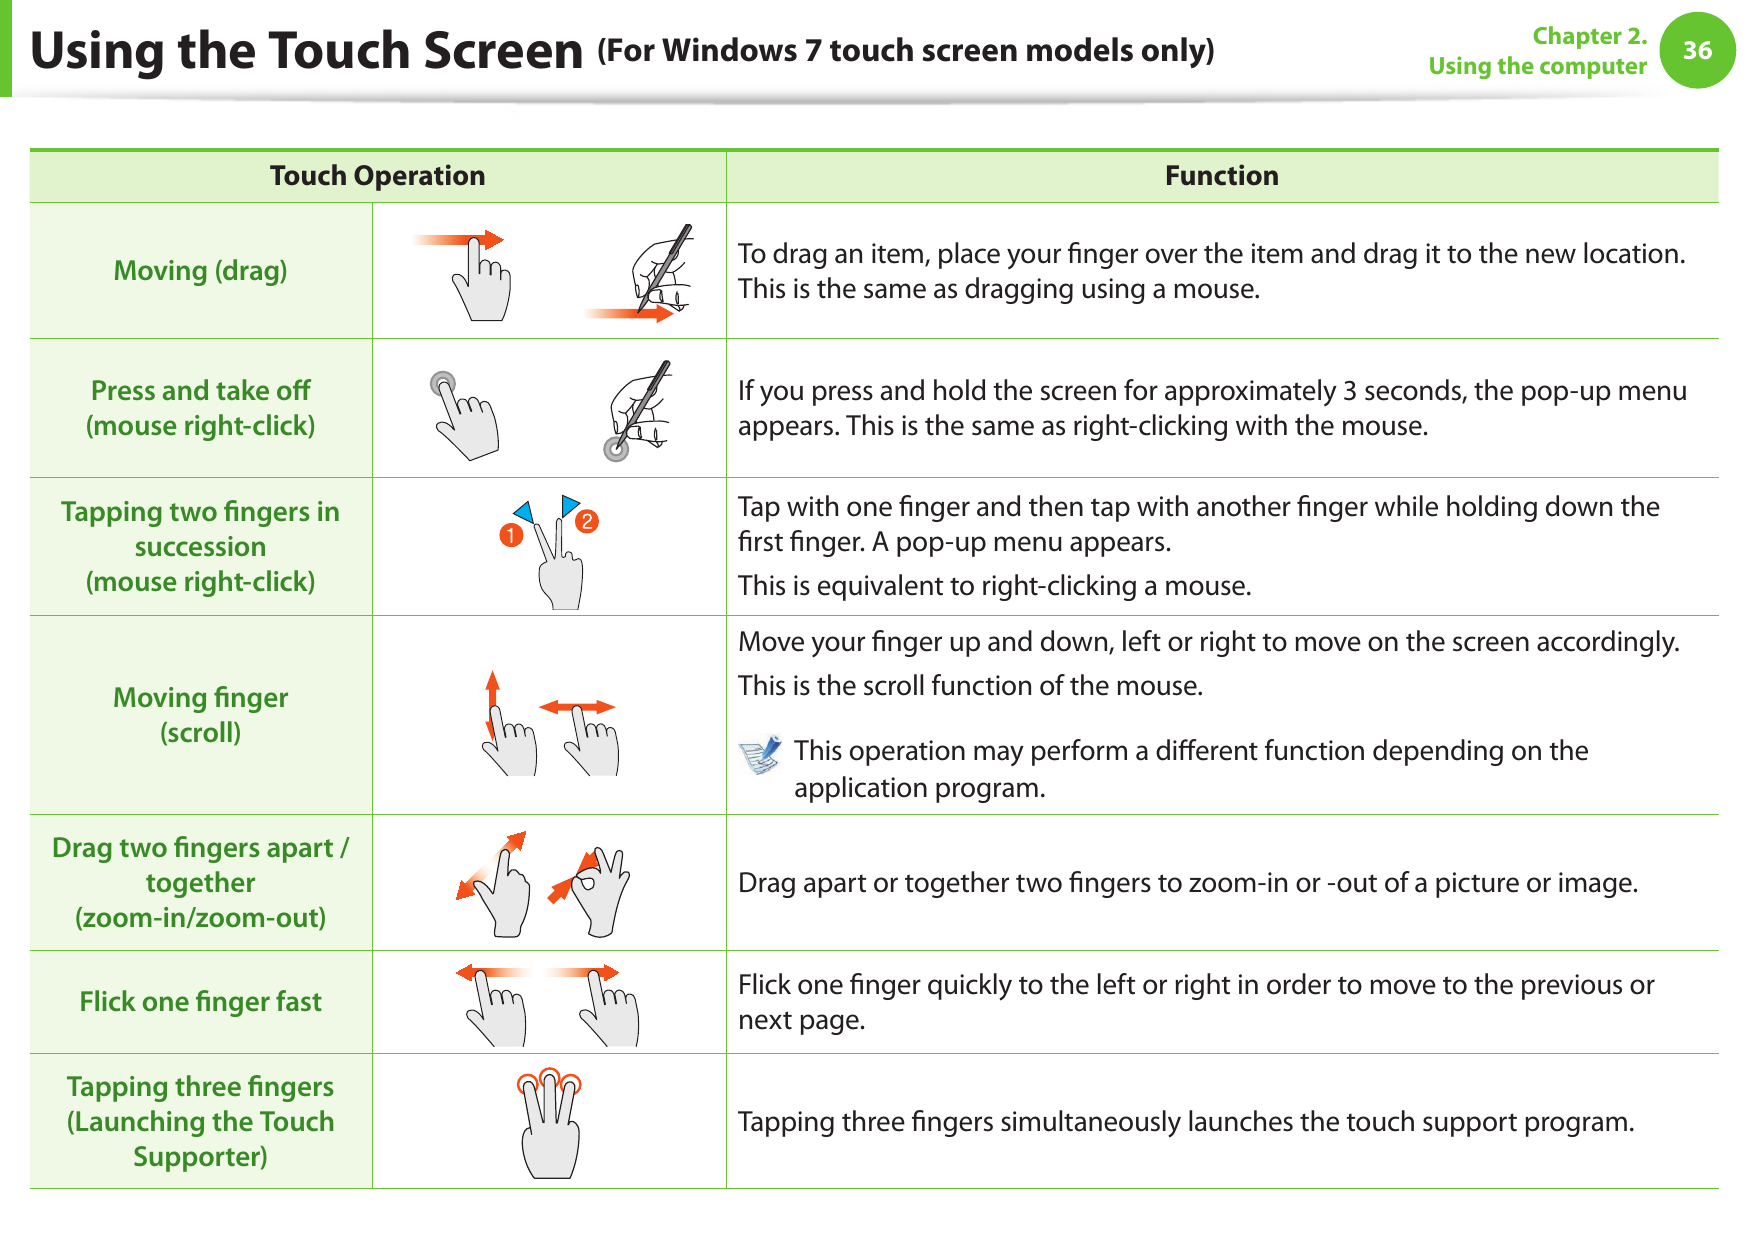 36Chapter 2. Using the computerUsing the Touch Screen (For Windows 7 touch screen models only)Touch Operation FunctionMoving (drag) To drag an item, place your  nger over the item and drag it to the new location. This is the same as dragging using a mouse.Press and take oﬀ (mouse right-click)If you press and hold the screen for approximately 3 seconds, the pop-up menu appears. This is the same as right-clicking with the mouse.Tapping two ﬁ ngers in succession (mouse right-click)Tap with one  nger and then tap with another  nger while holding down the  rst  nger. A pop-up menu appears.This is equivalent to right-clicking a mouse.Moving ﬁ nger (scroll)Move your  nger up and down, left or right to move on the screen accordingly.This is the scroll function of the mouse.   This operation may perform a di erent function depending on the application program.Drag two ﬁ ngers apart / together (zoom-in/zoom-out)Drag apart or together two  ngers to zoom-in or -out of a picture or image.Flick one ﬁ nger fast Flick one  nger quickly to the left or right in order to move to the previous or next page.Tapping three ﬁ ngers (Launching the Touch Supporter)Tapping three  ngers simultaneously launches the touch support program.